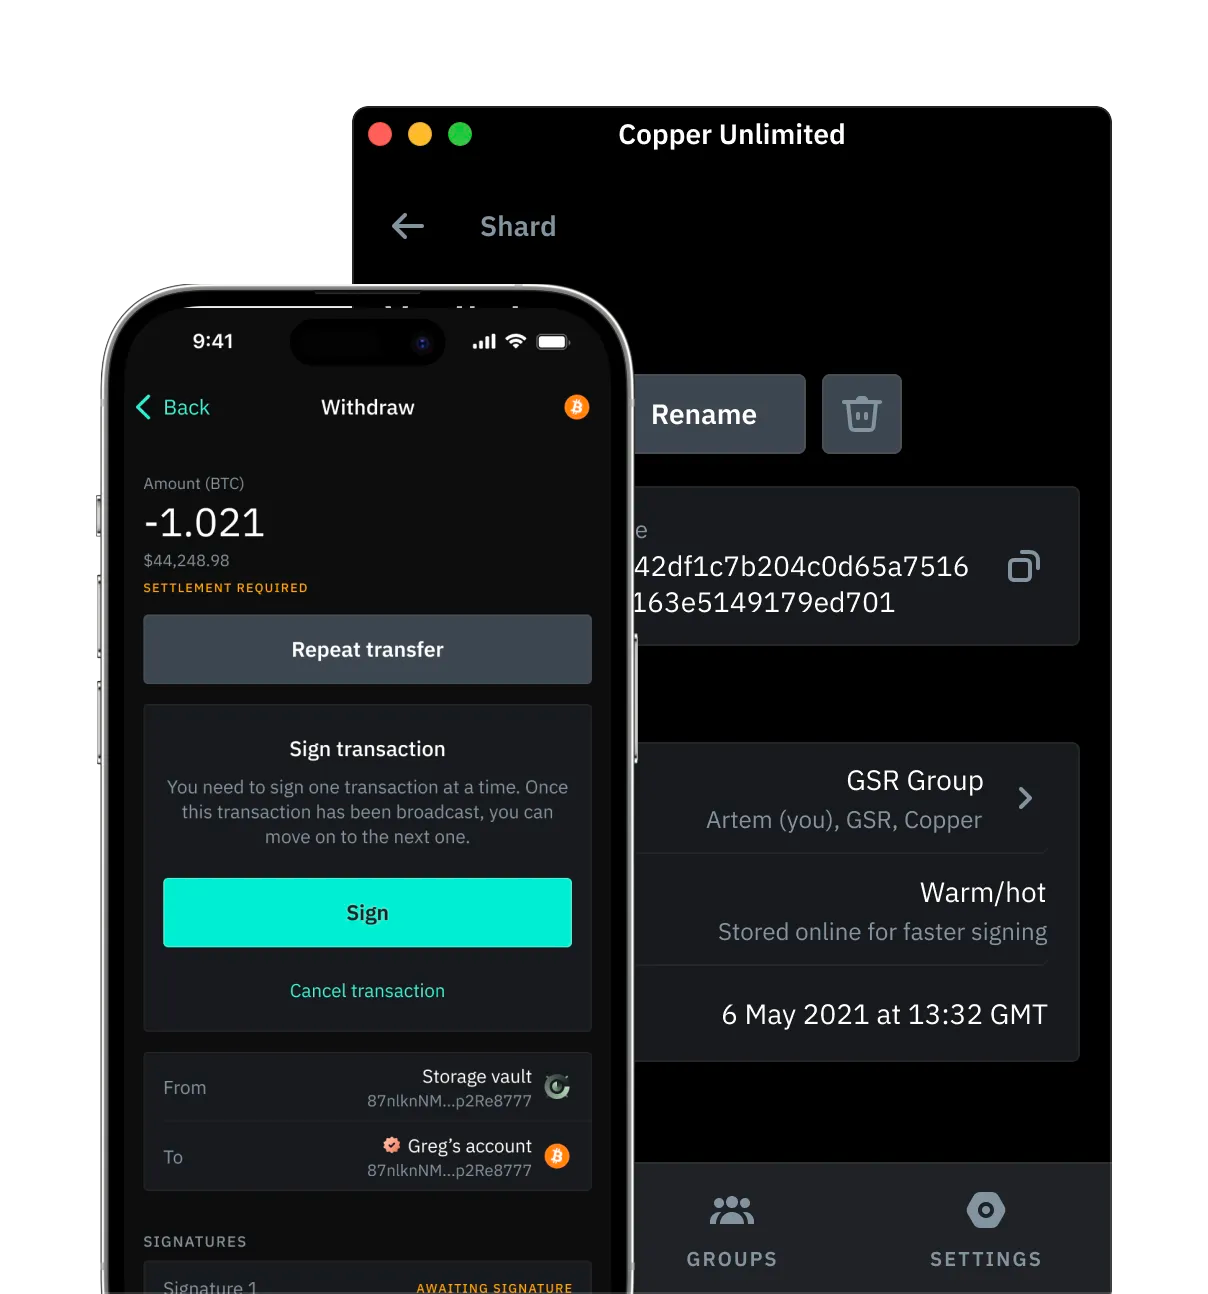 Copper Unlimited on mobile devices